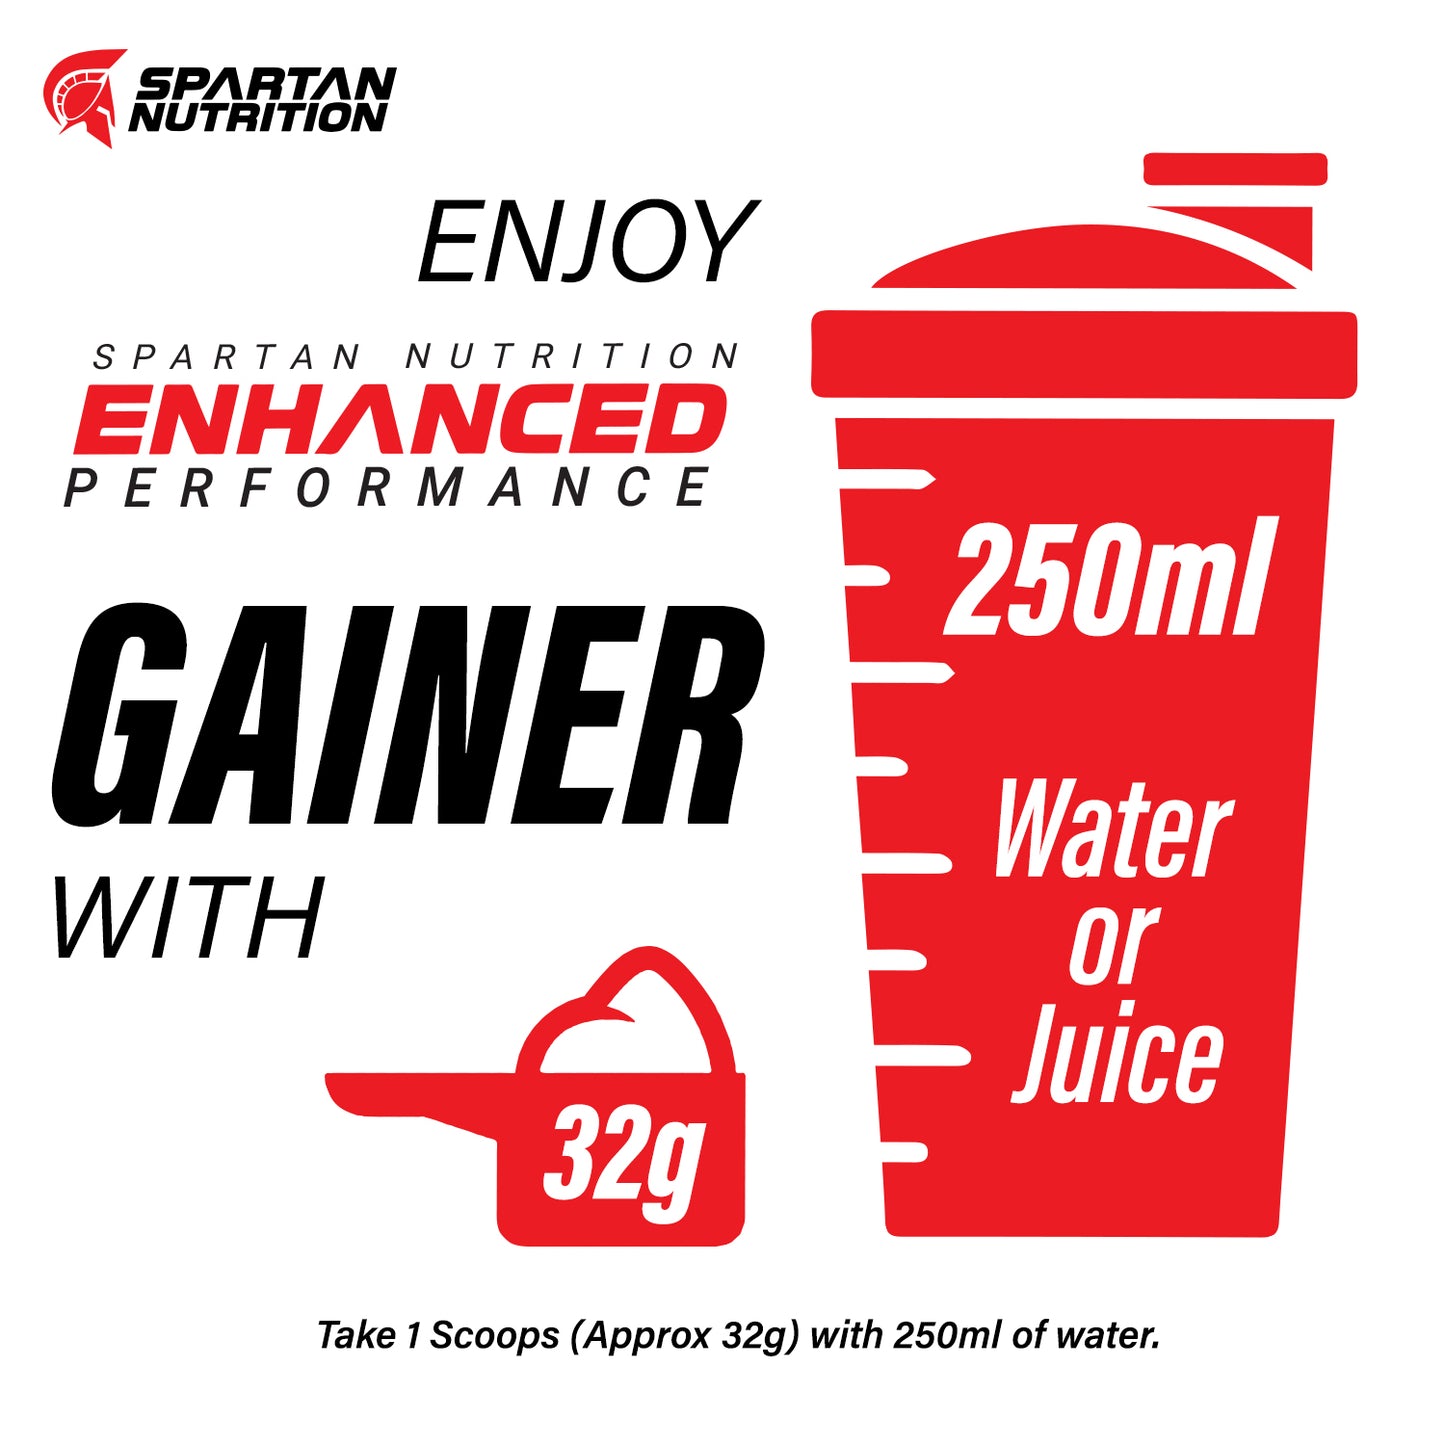 Spartan Nutrition Enhanced Performance Gainer High Protein and High Calorie with L-Glutamine and Creatine Monohydrate, Mass Gainer / Weight Gainer Powder – 6lbs, 2.72KG